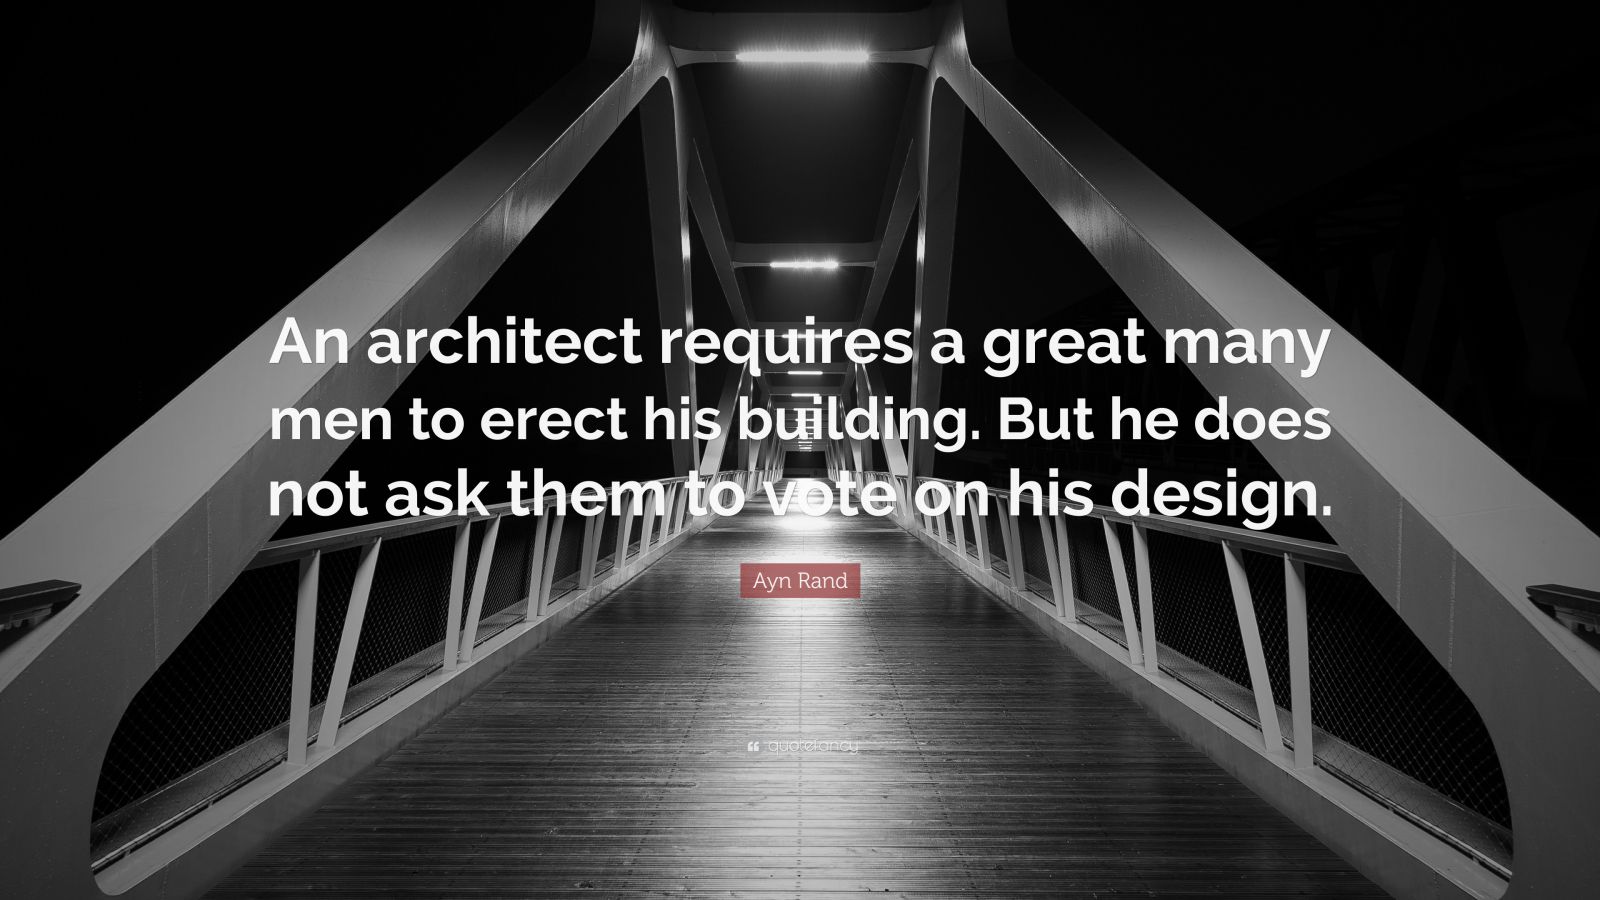 Ayn Rand Quote: “An architect requires a great many men to erect his ...